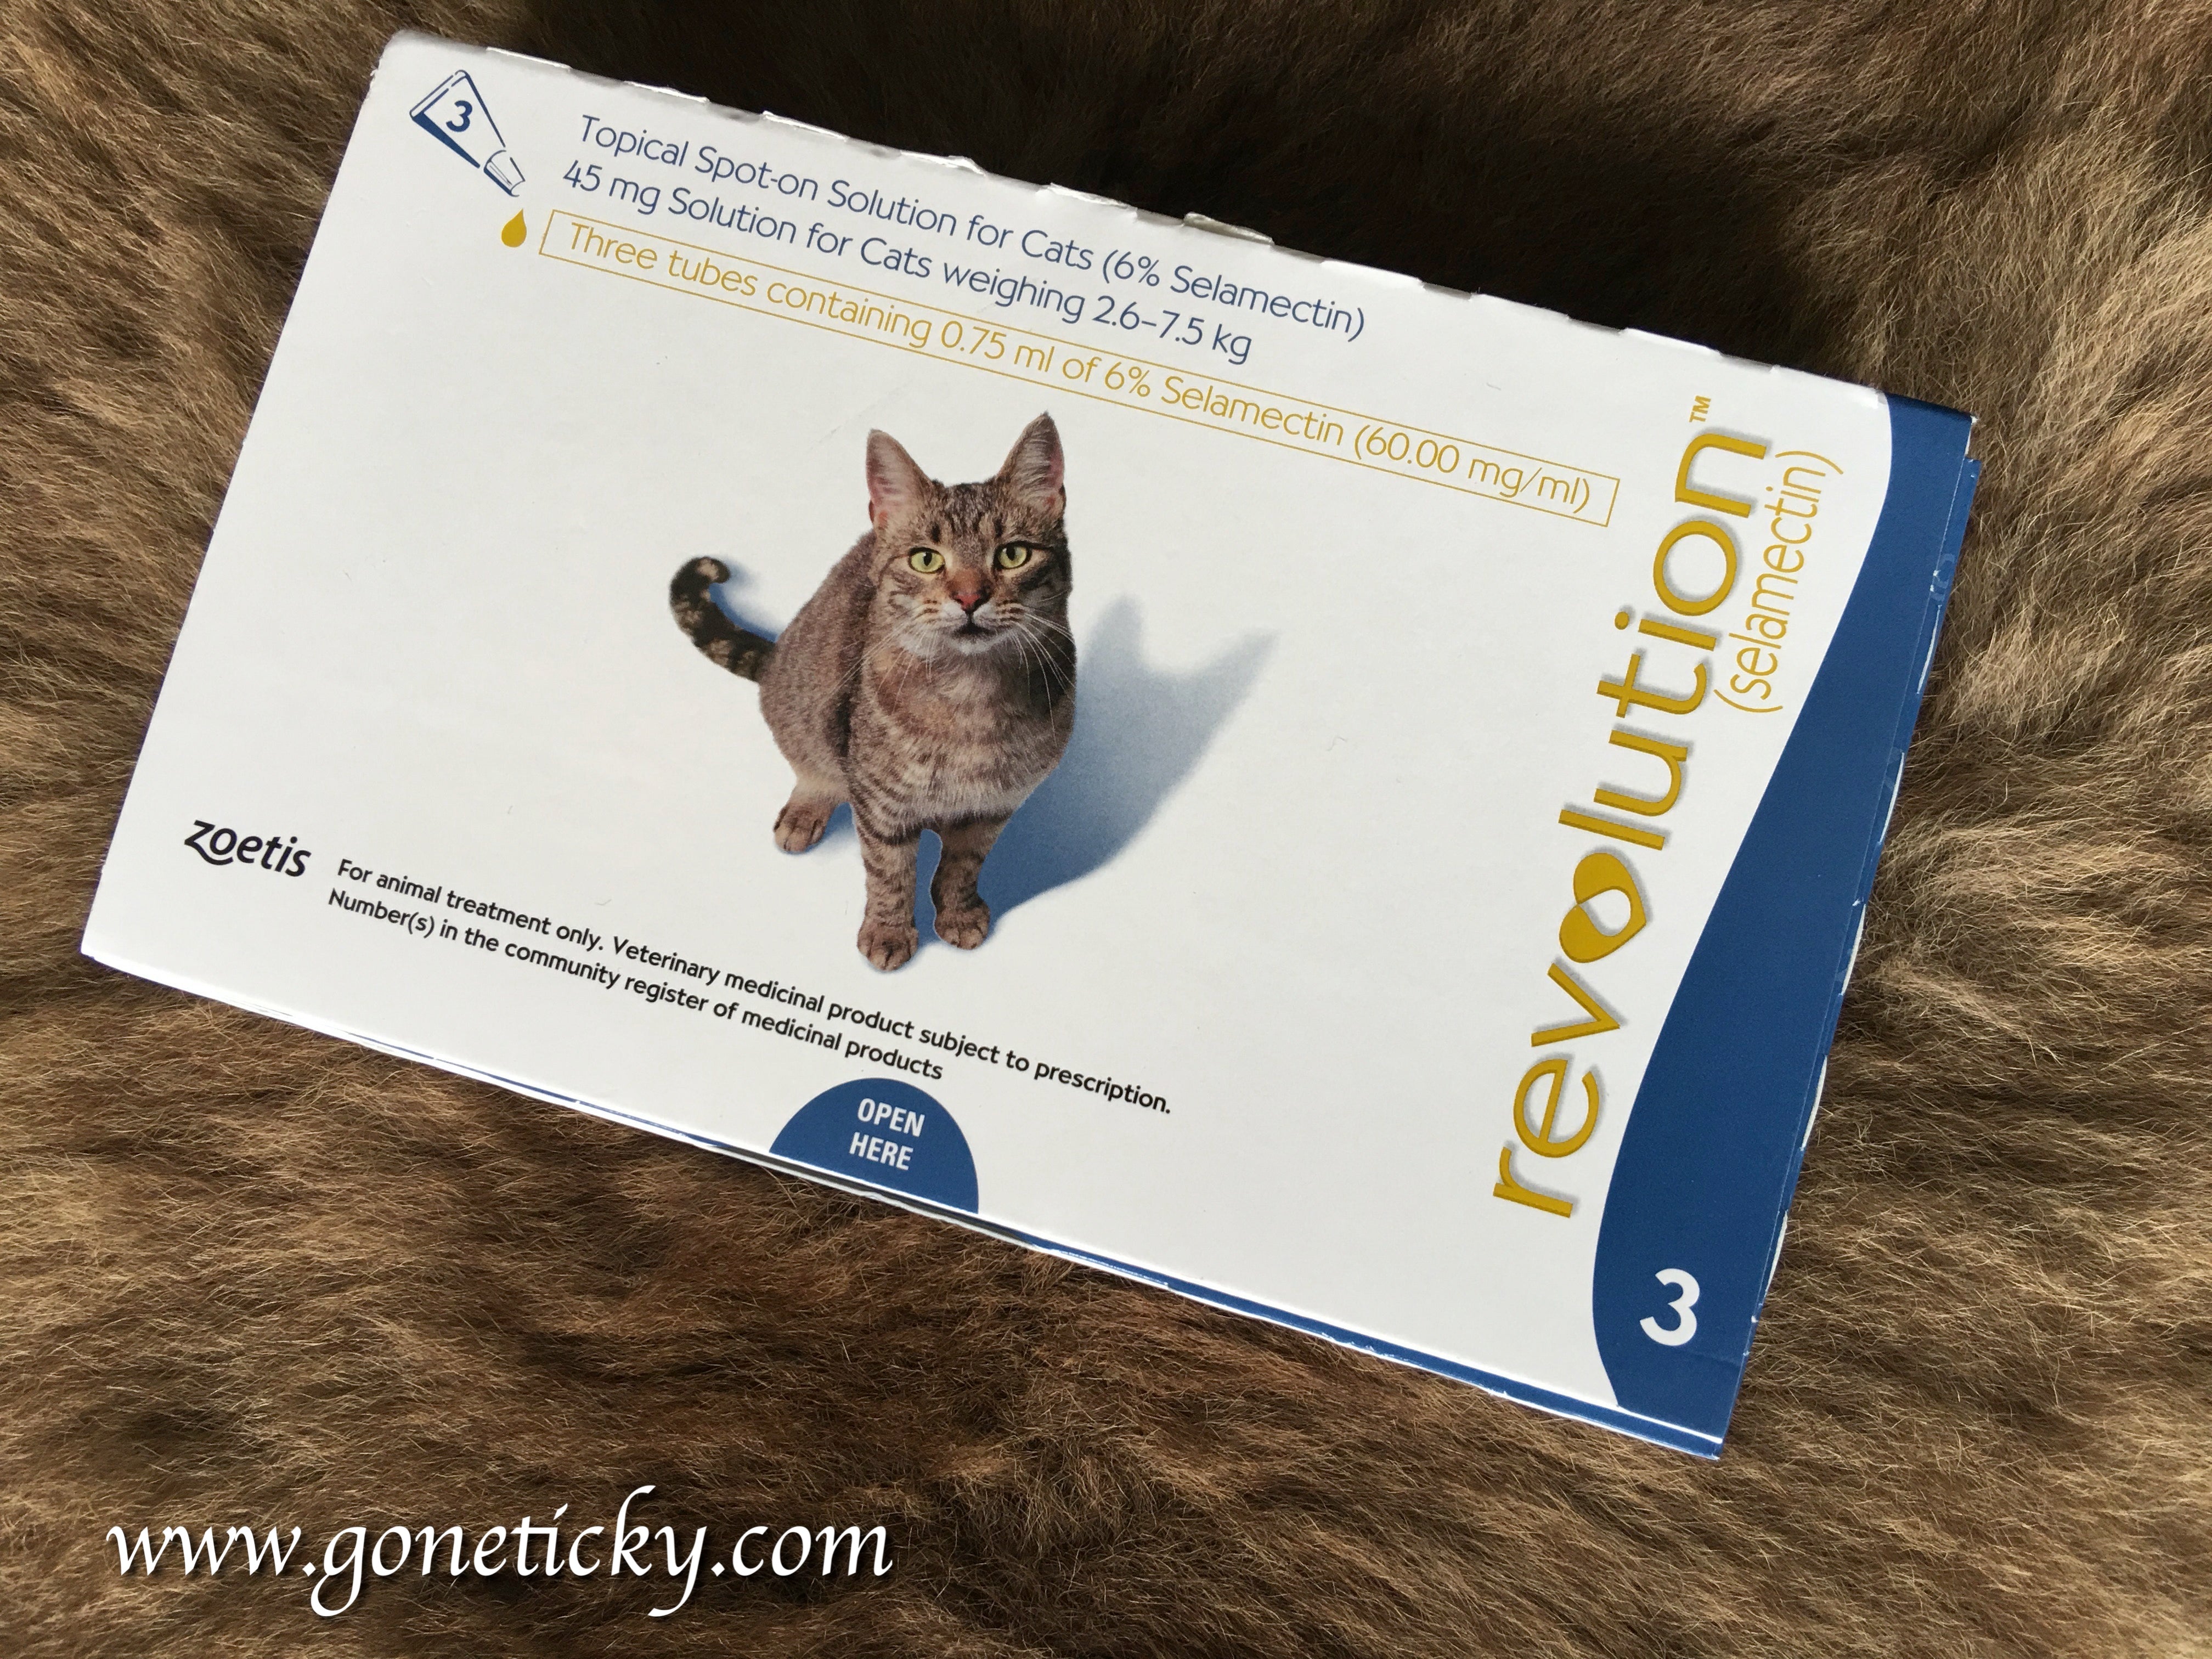 REVOLUTION® (3 doses) 45mg Treatment for Fleas And Ear Mites for CATS & KITTENS 5.1-15lbs (2.6-7.5kg)